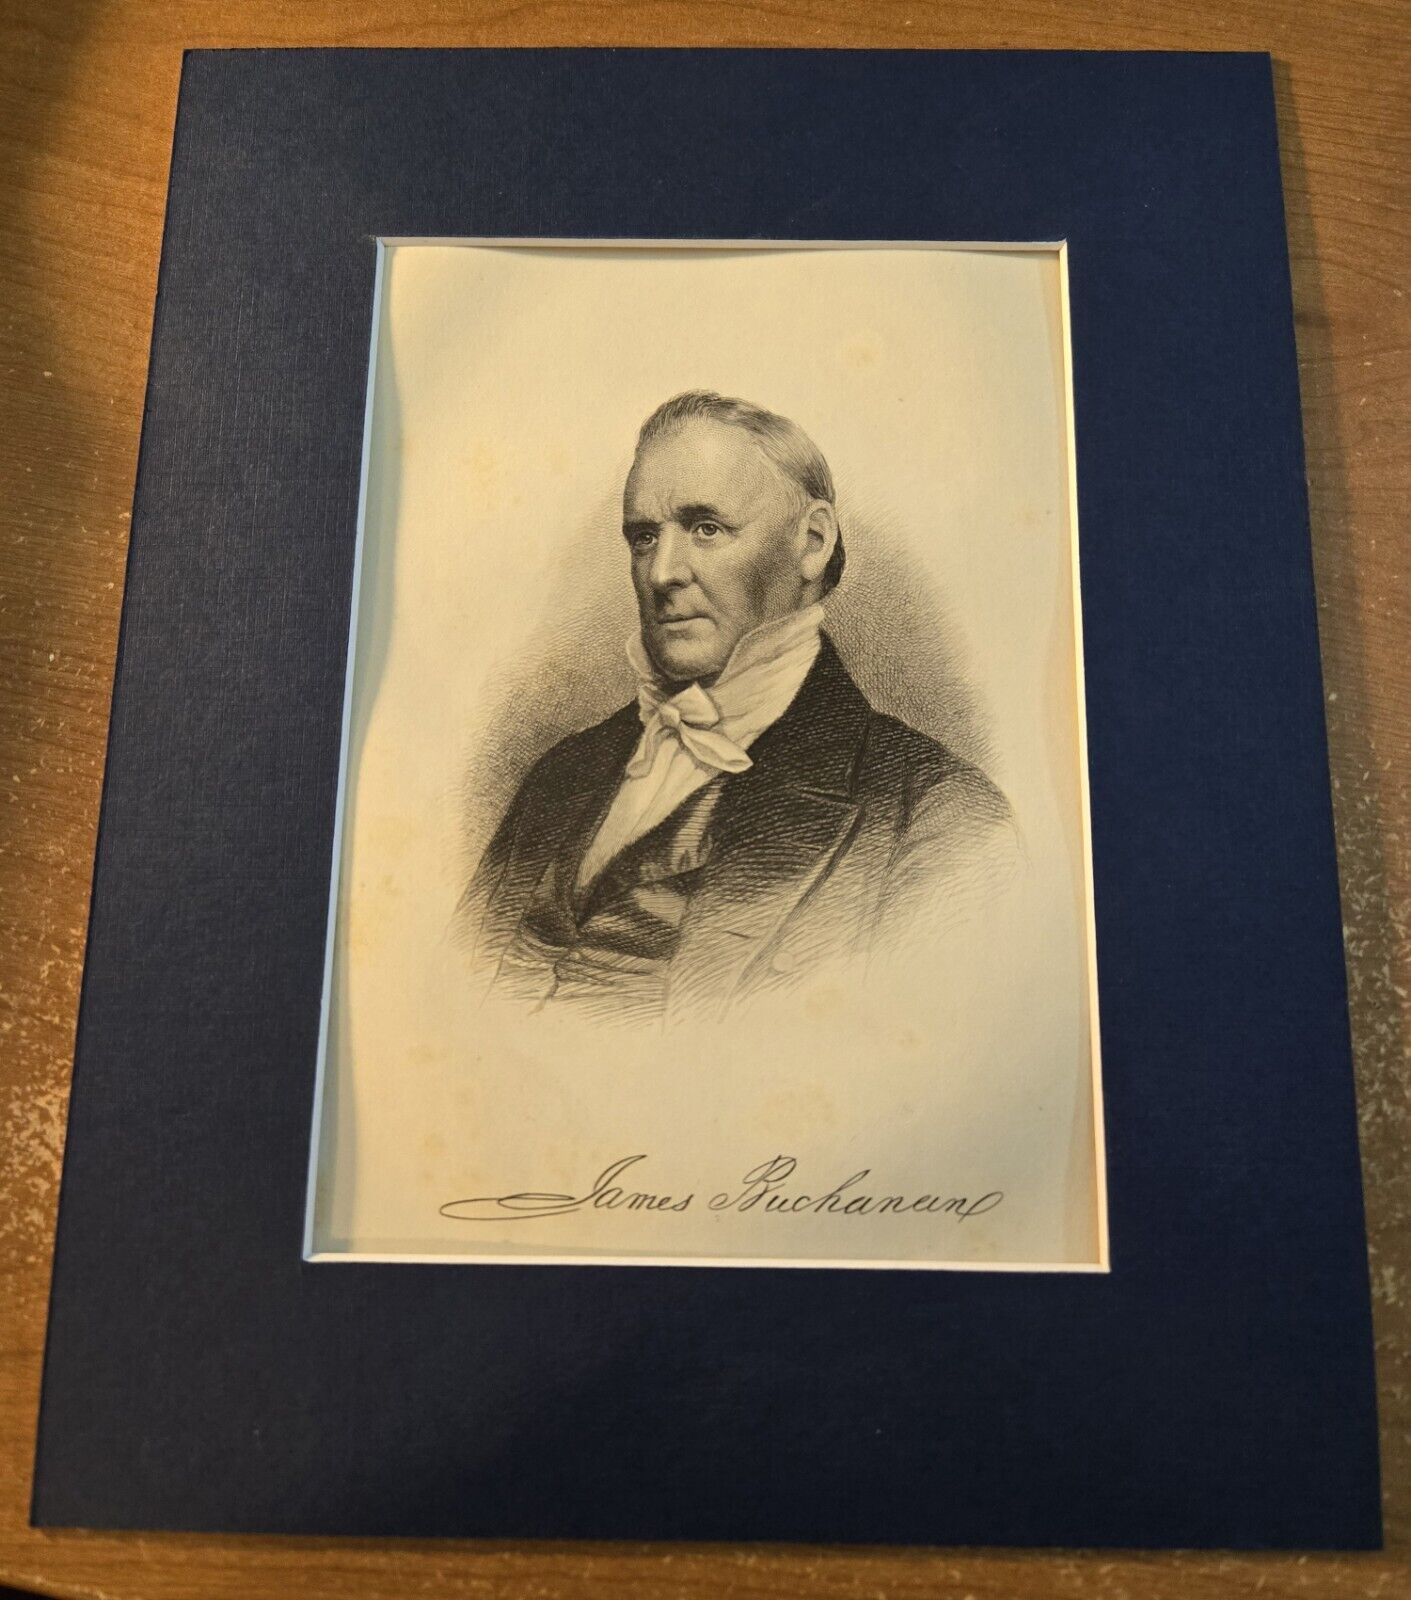 James Buchanan - Authentic 1889 Steel Engraving w/Signature - Matted